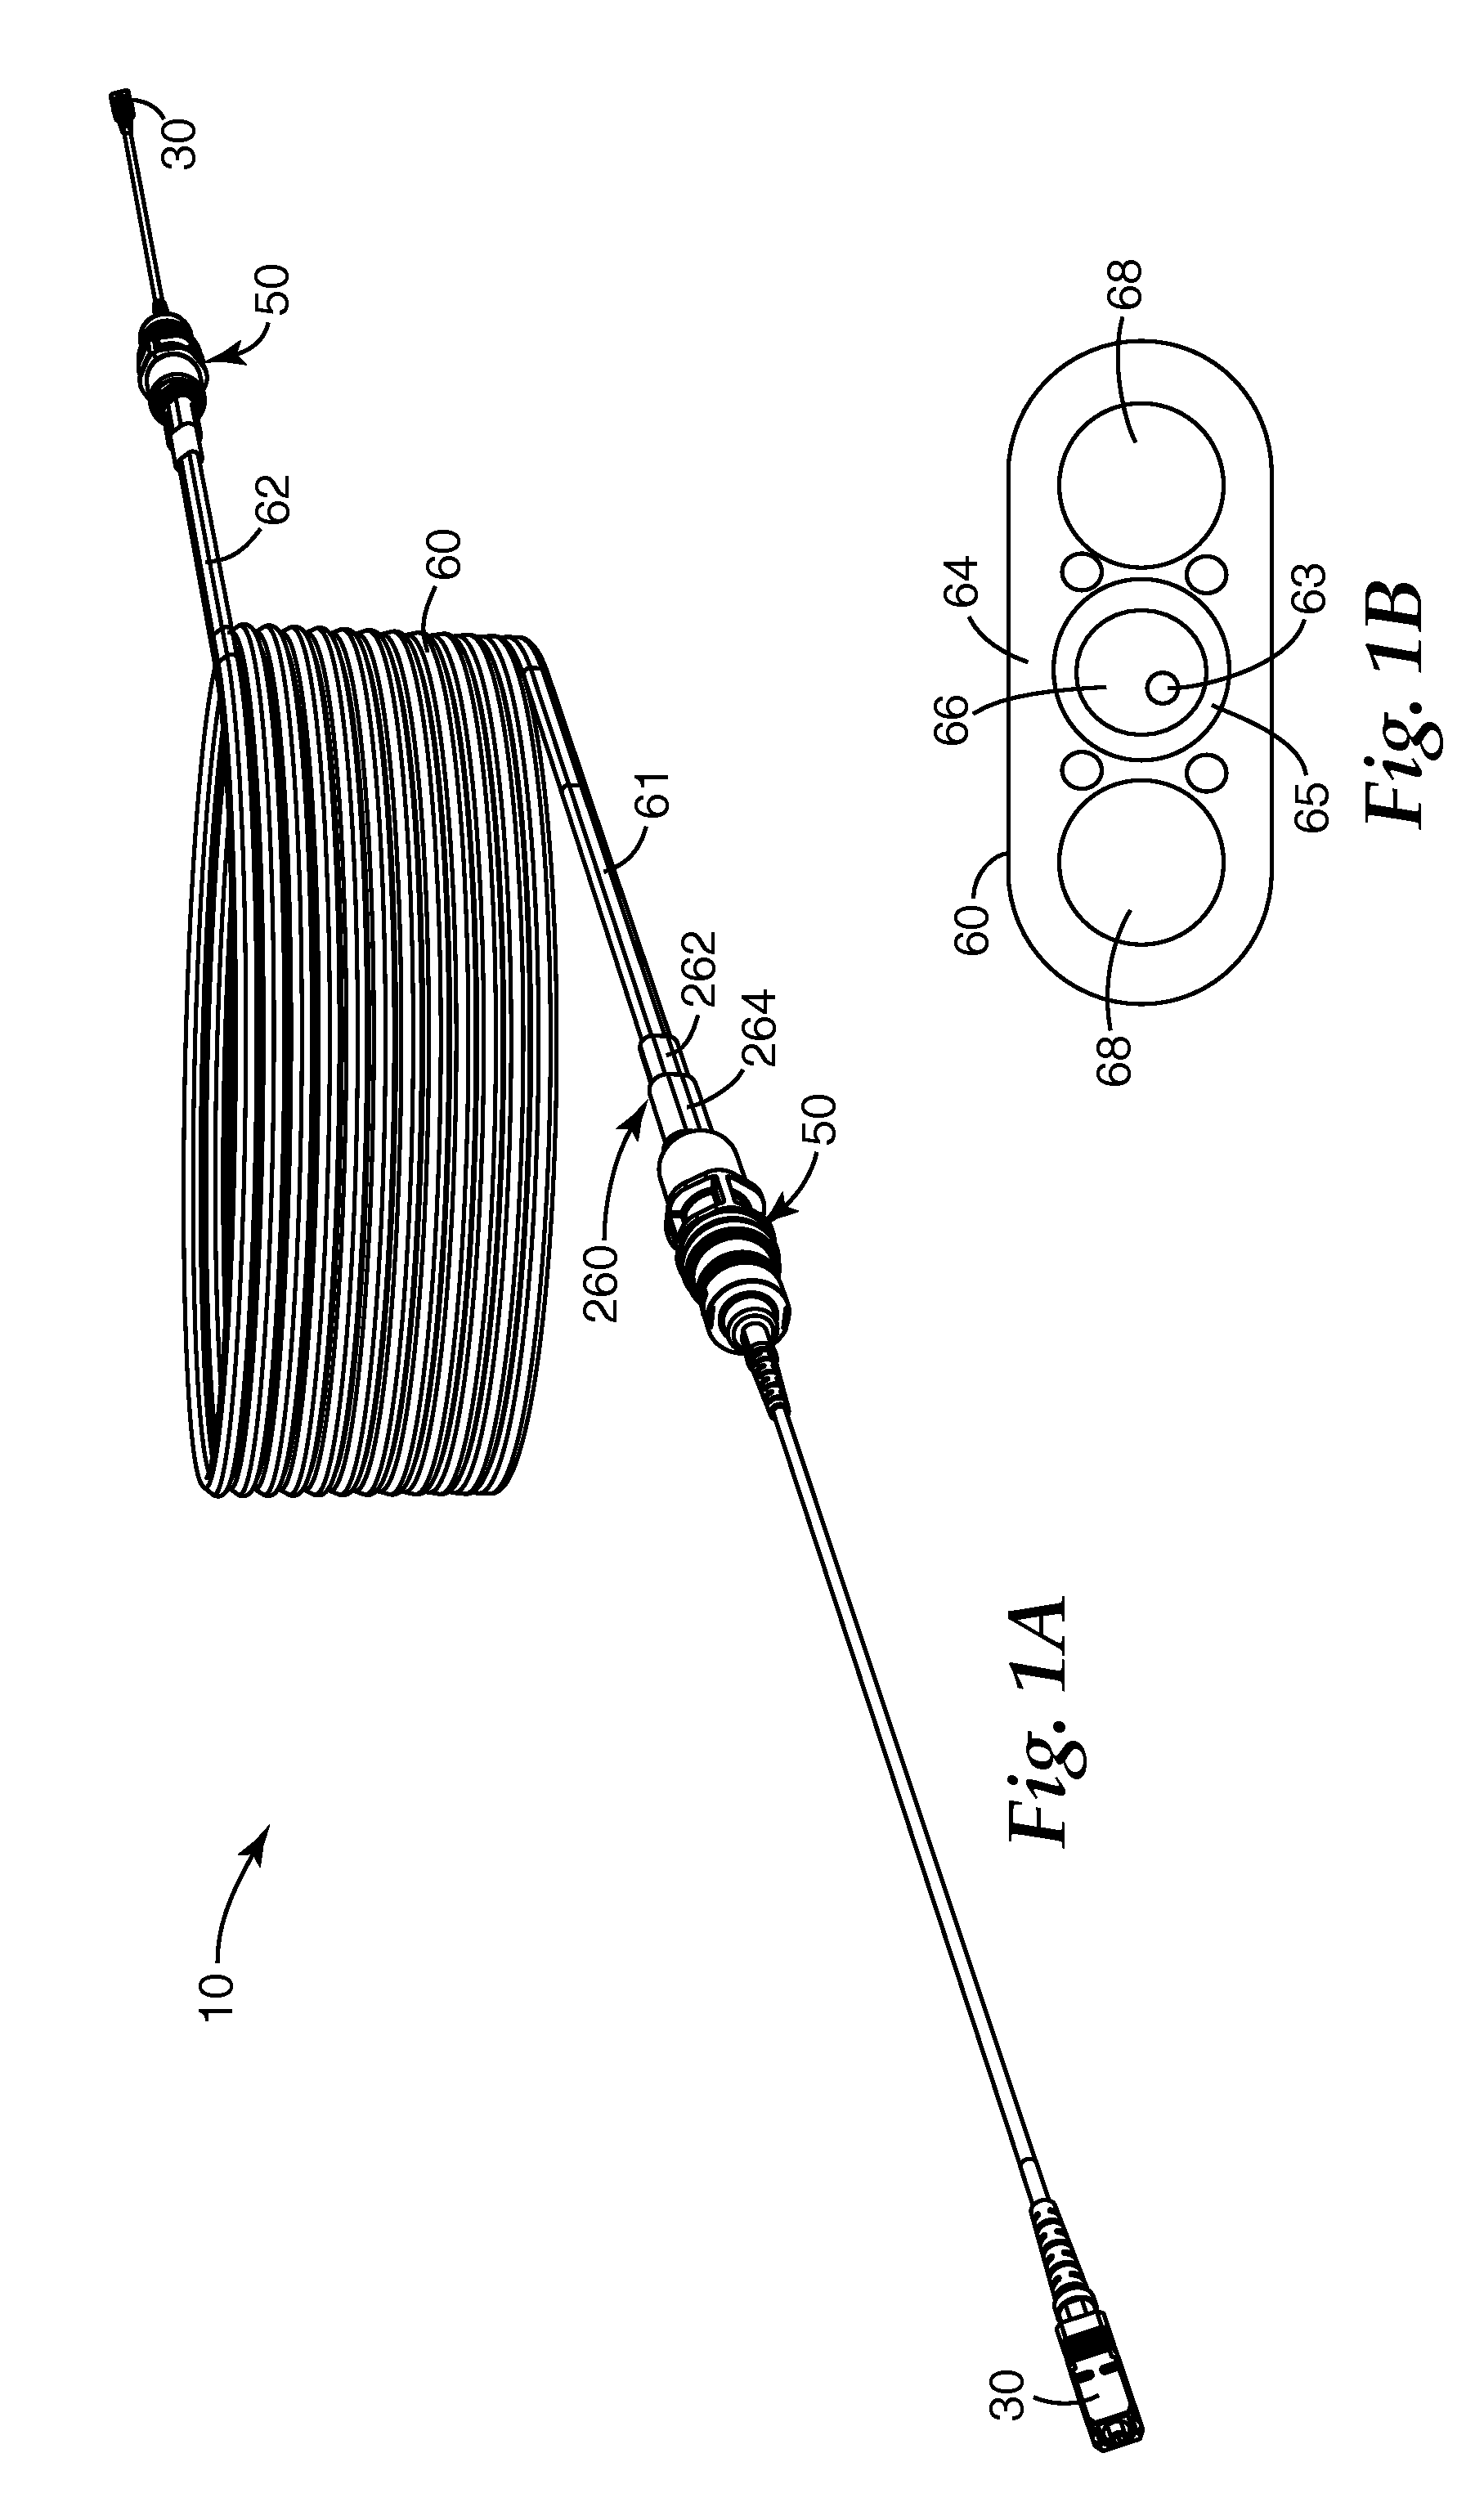 Optical fiber cable inlet device